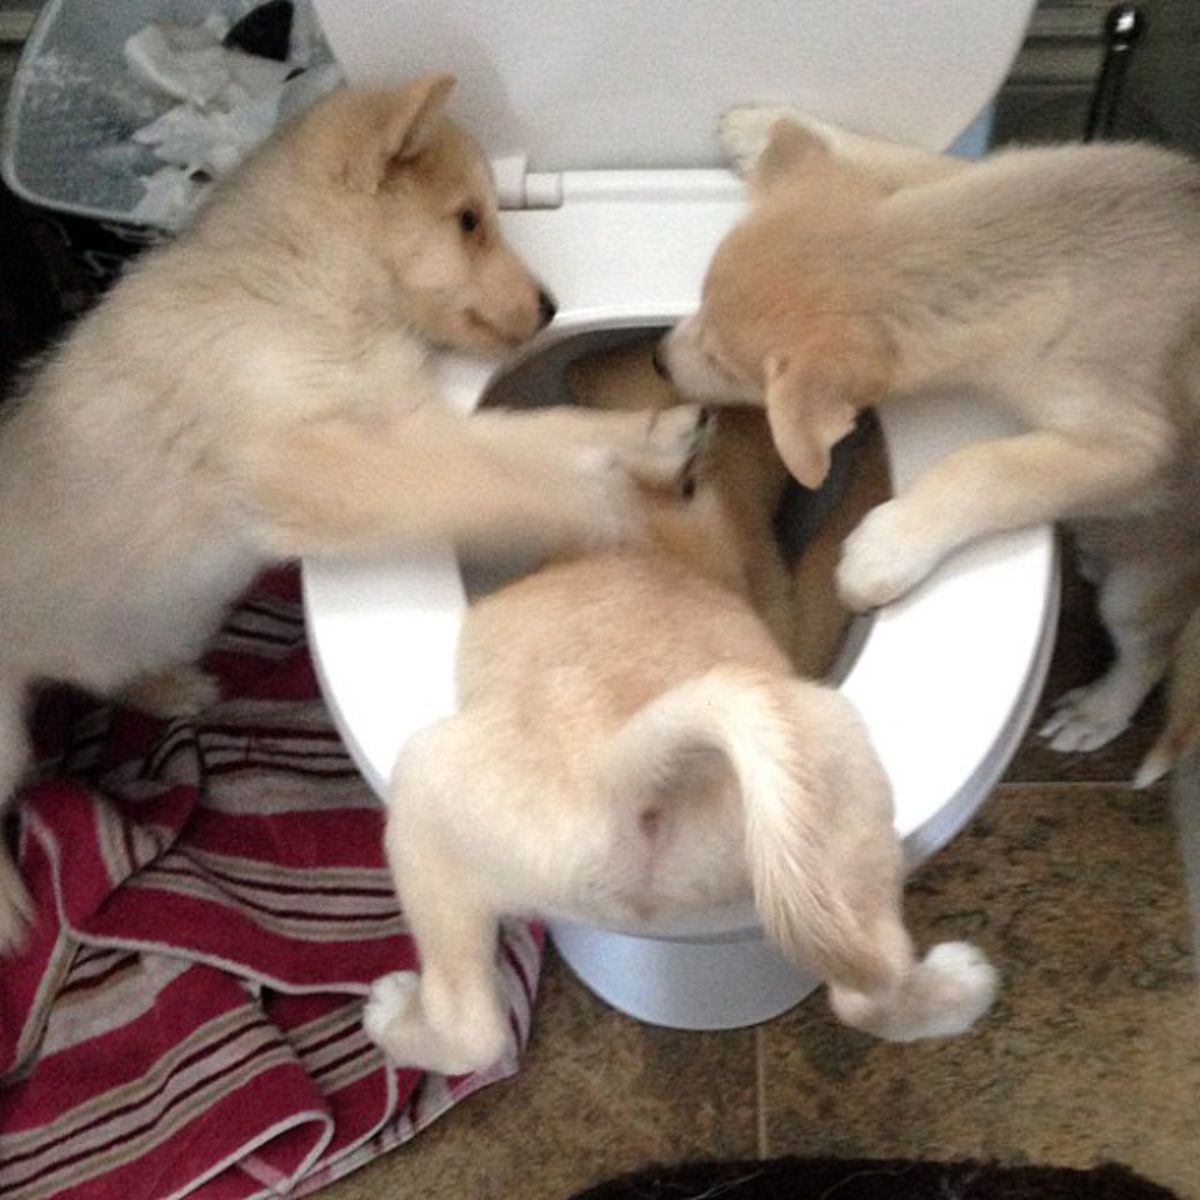 2 brown puppies pushing another brown puppy into a white toilet